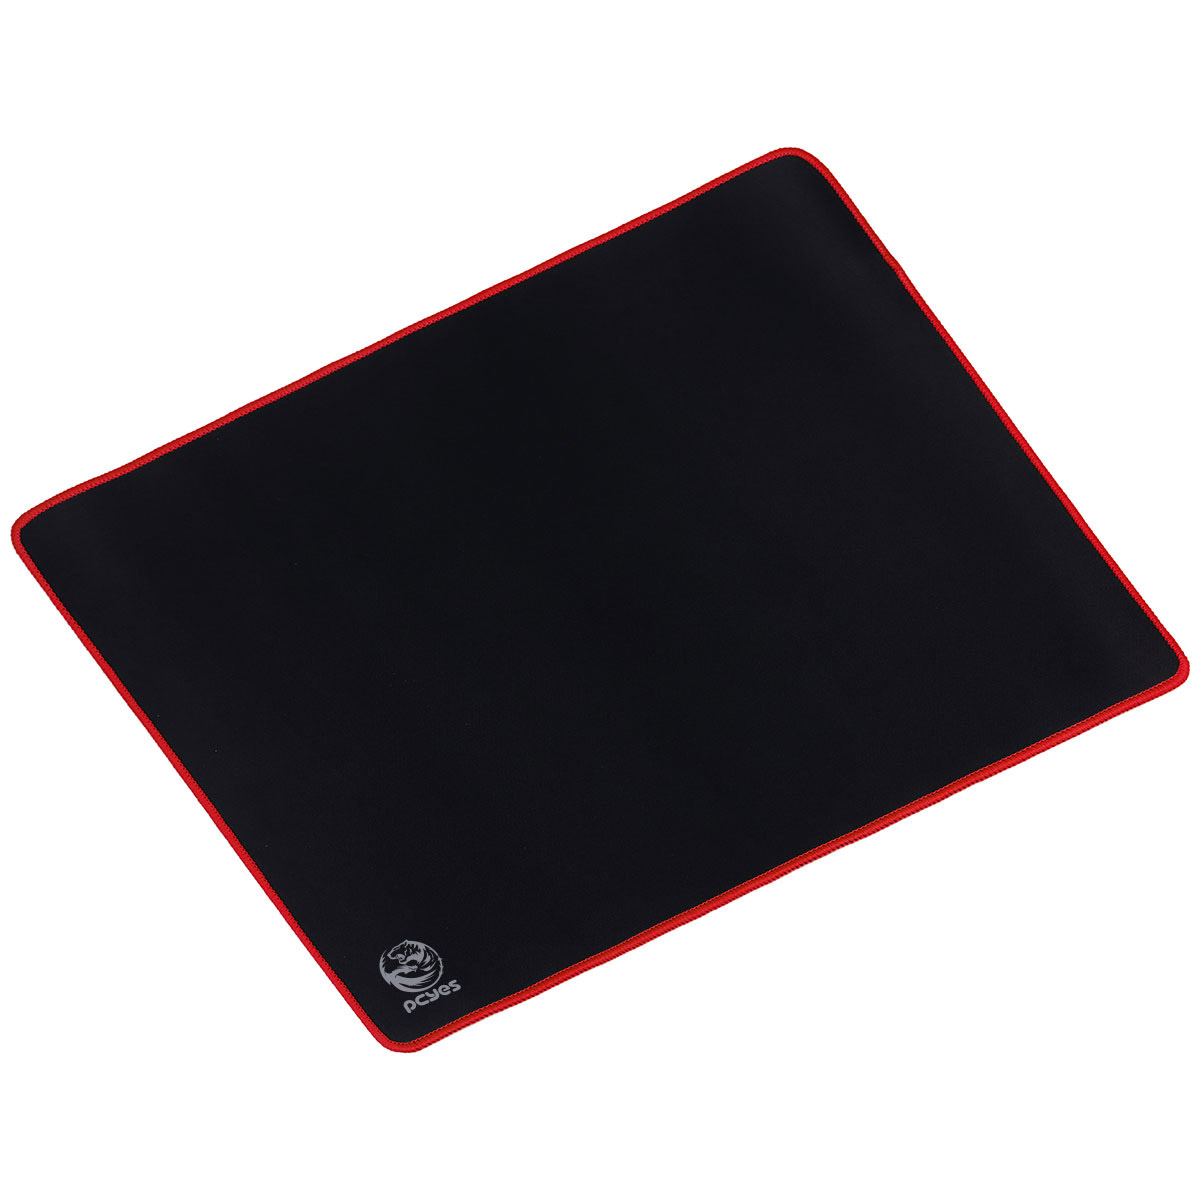 Mouse Pad Pcyes Colors Vermelho Standard 360x300mm